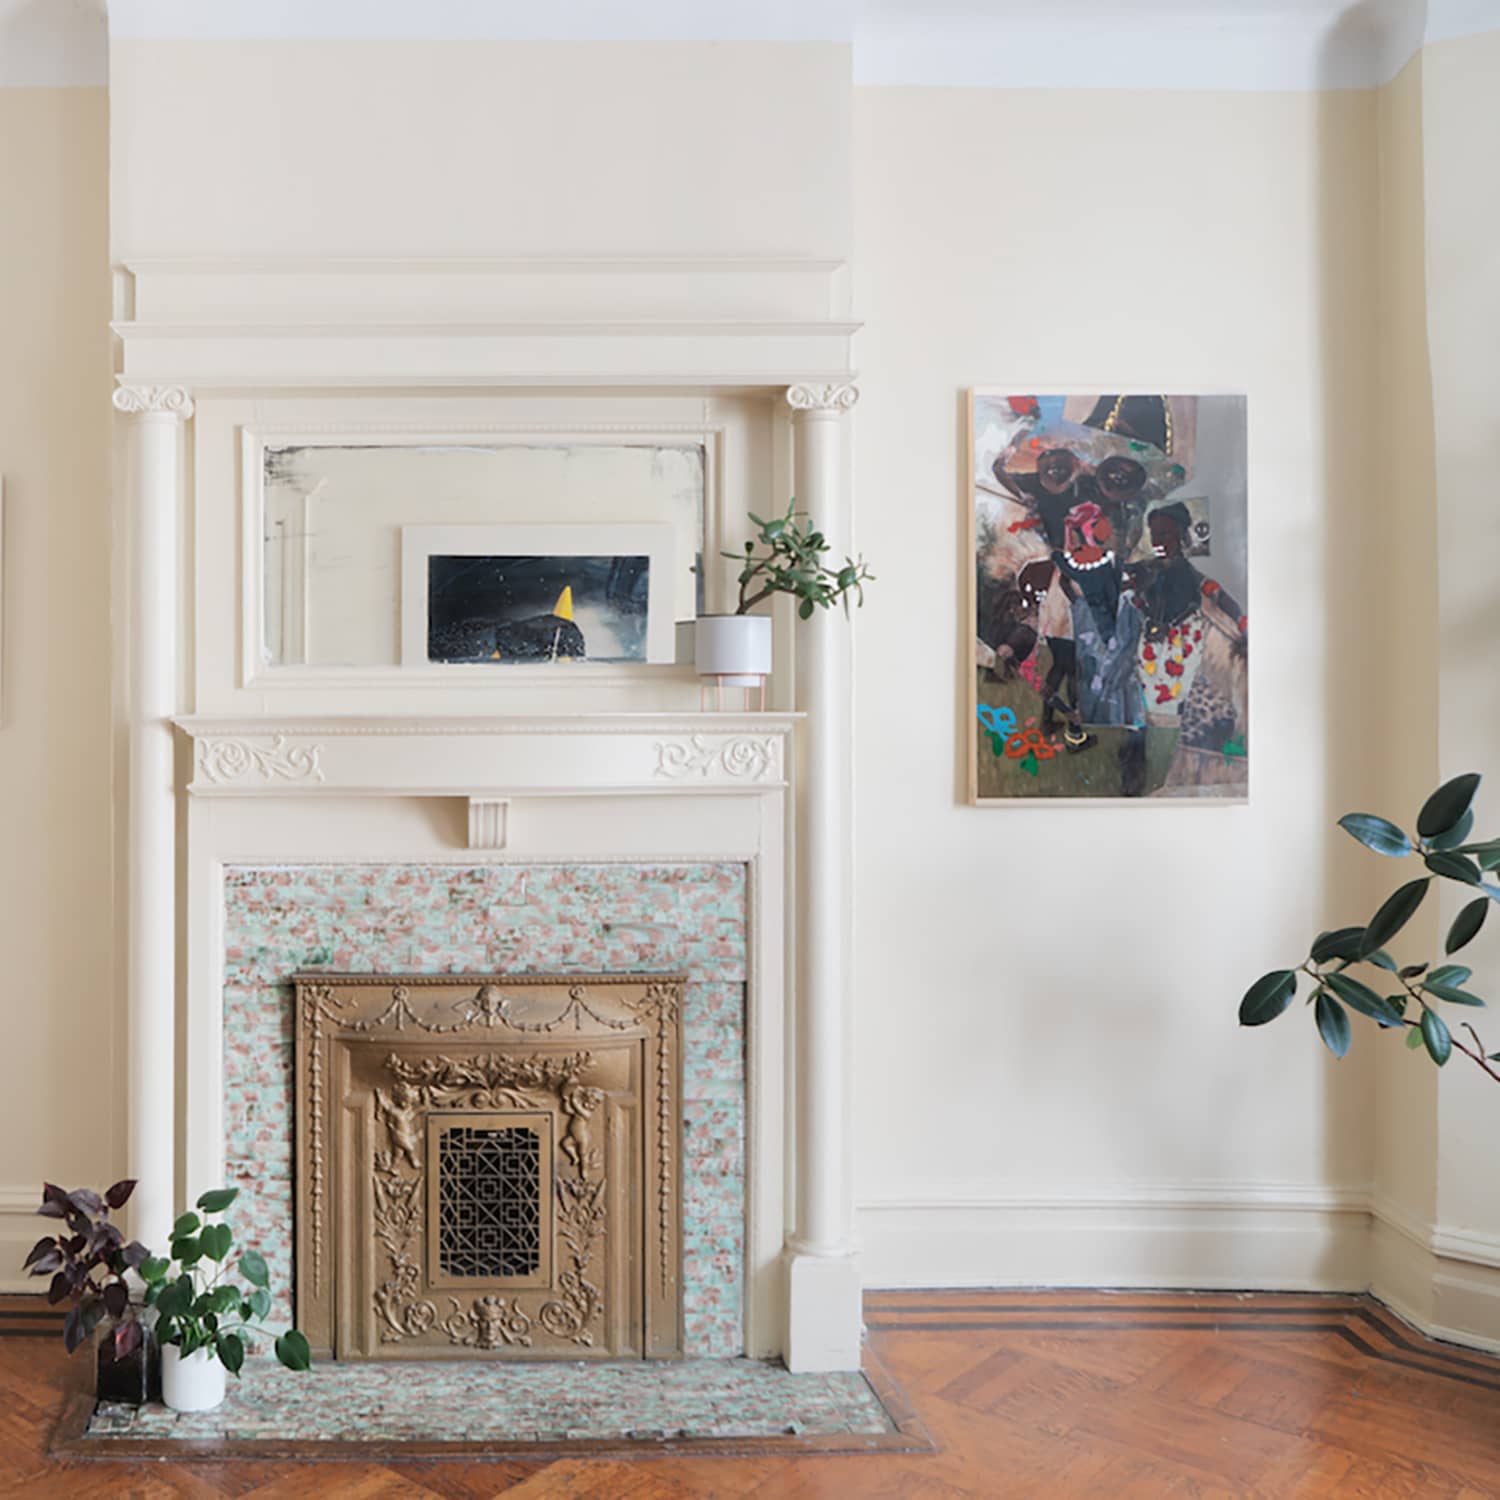 Kylie M Interiors - How to Update your Fireplace - 5 Easy Update Ideas